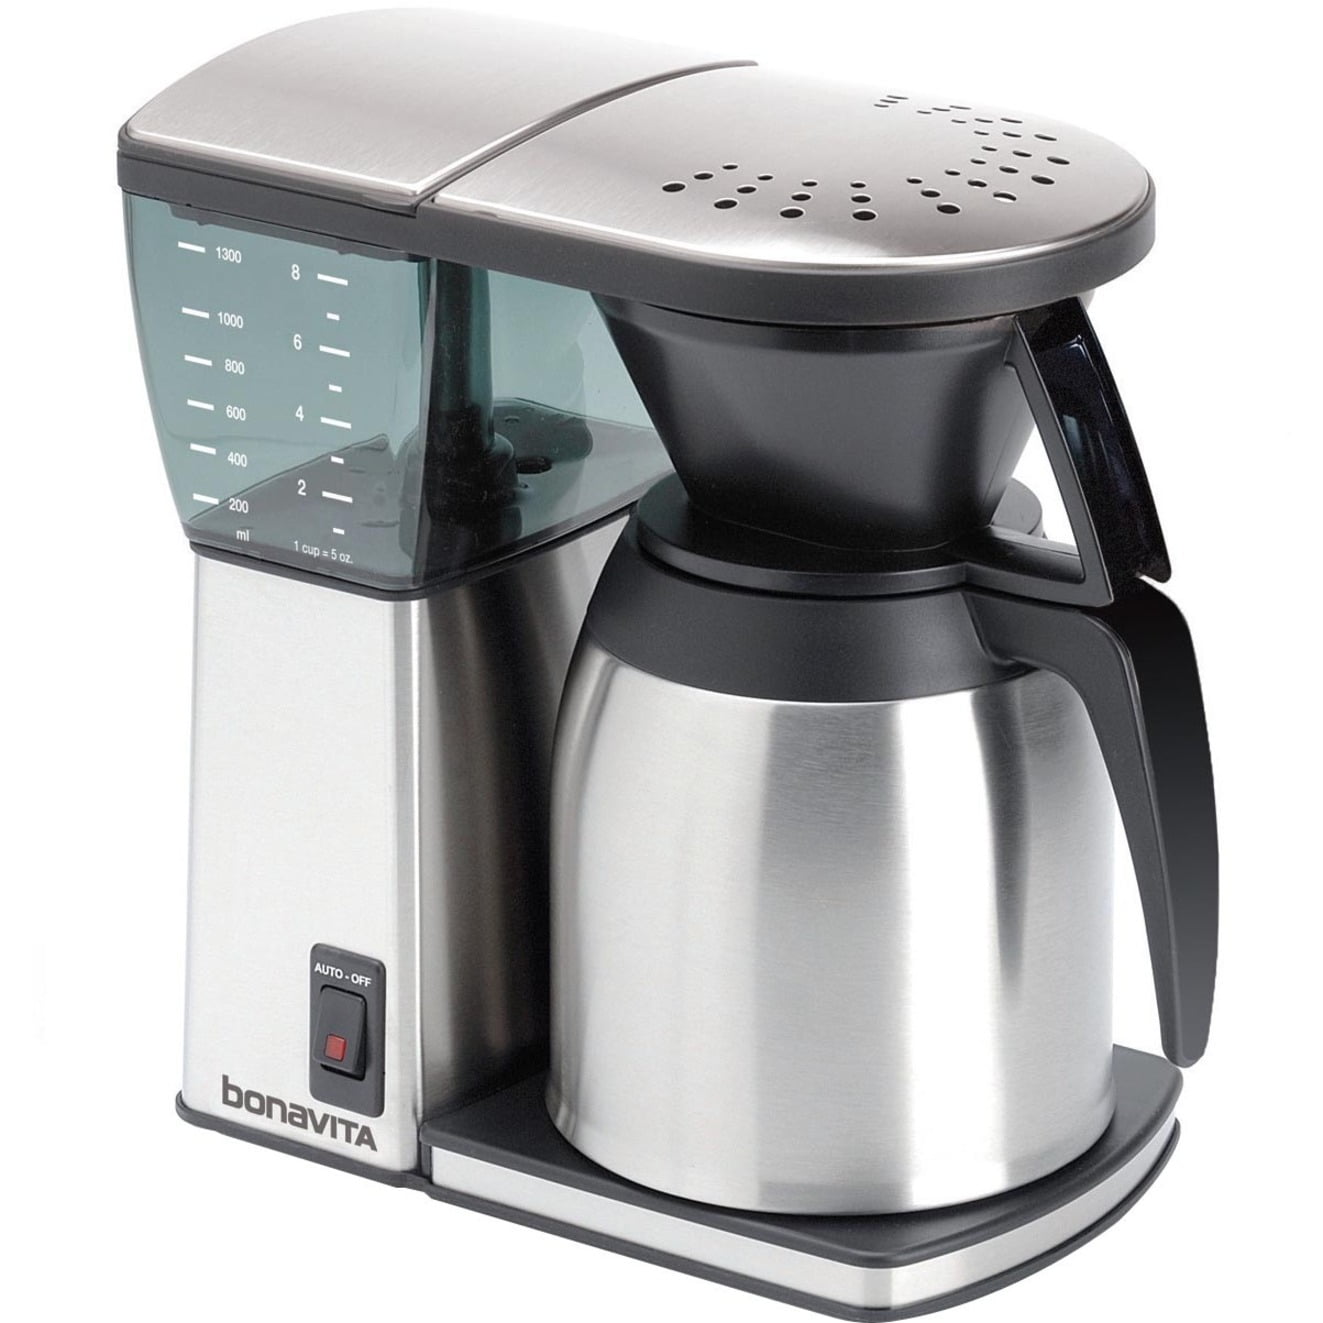 The best choice to stay at home - Bonavita 8 Cup One-Touch Coffee